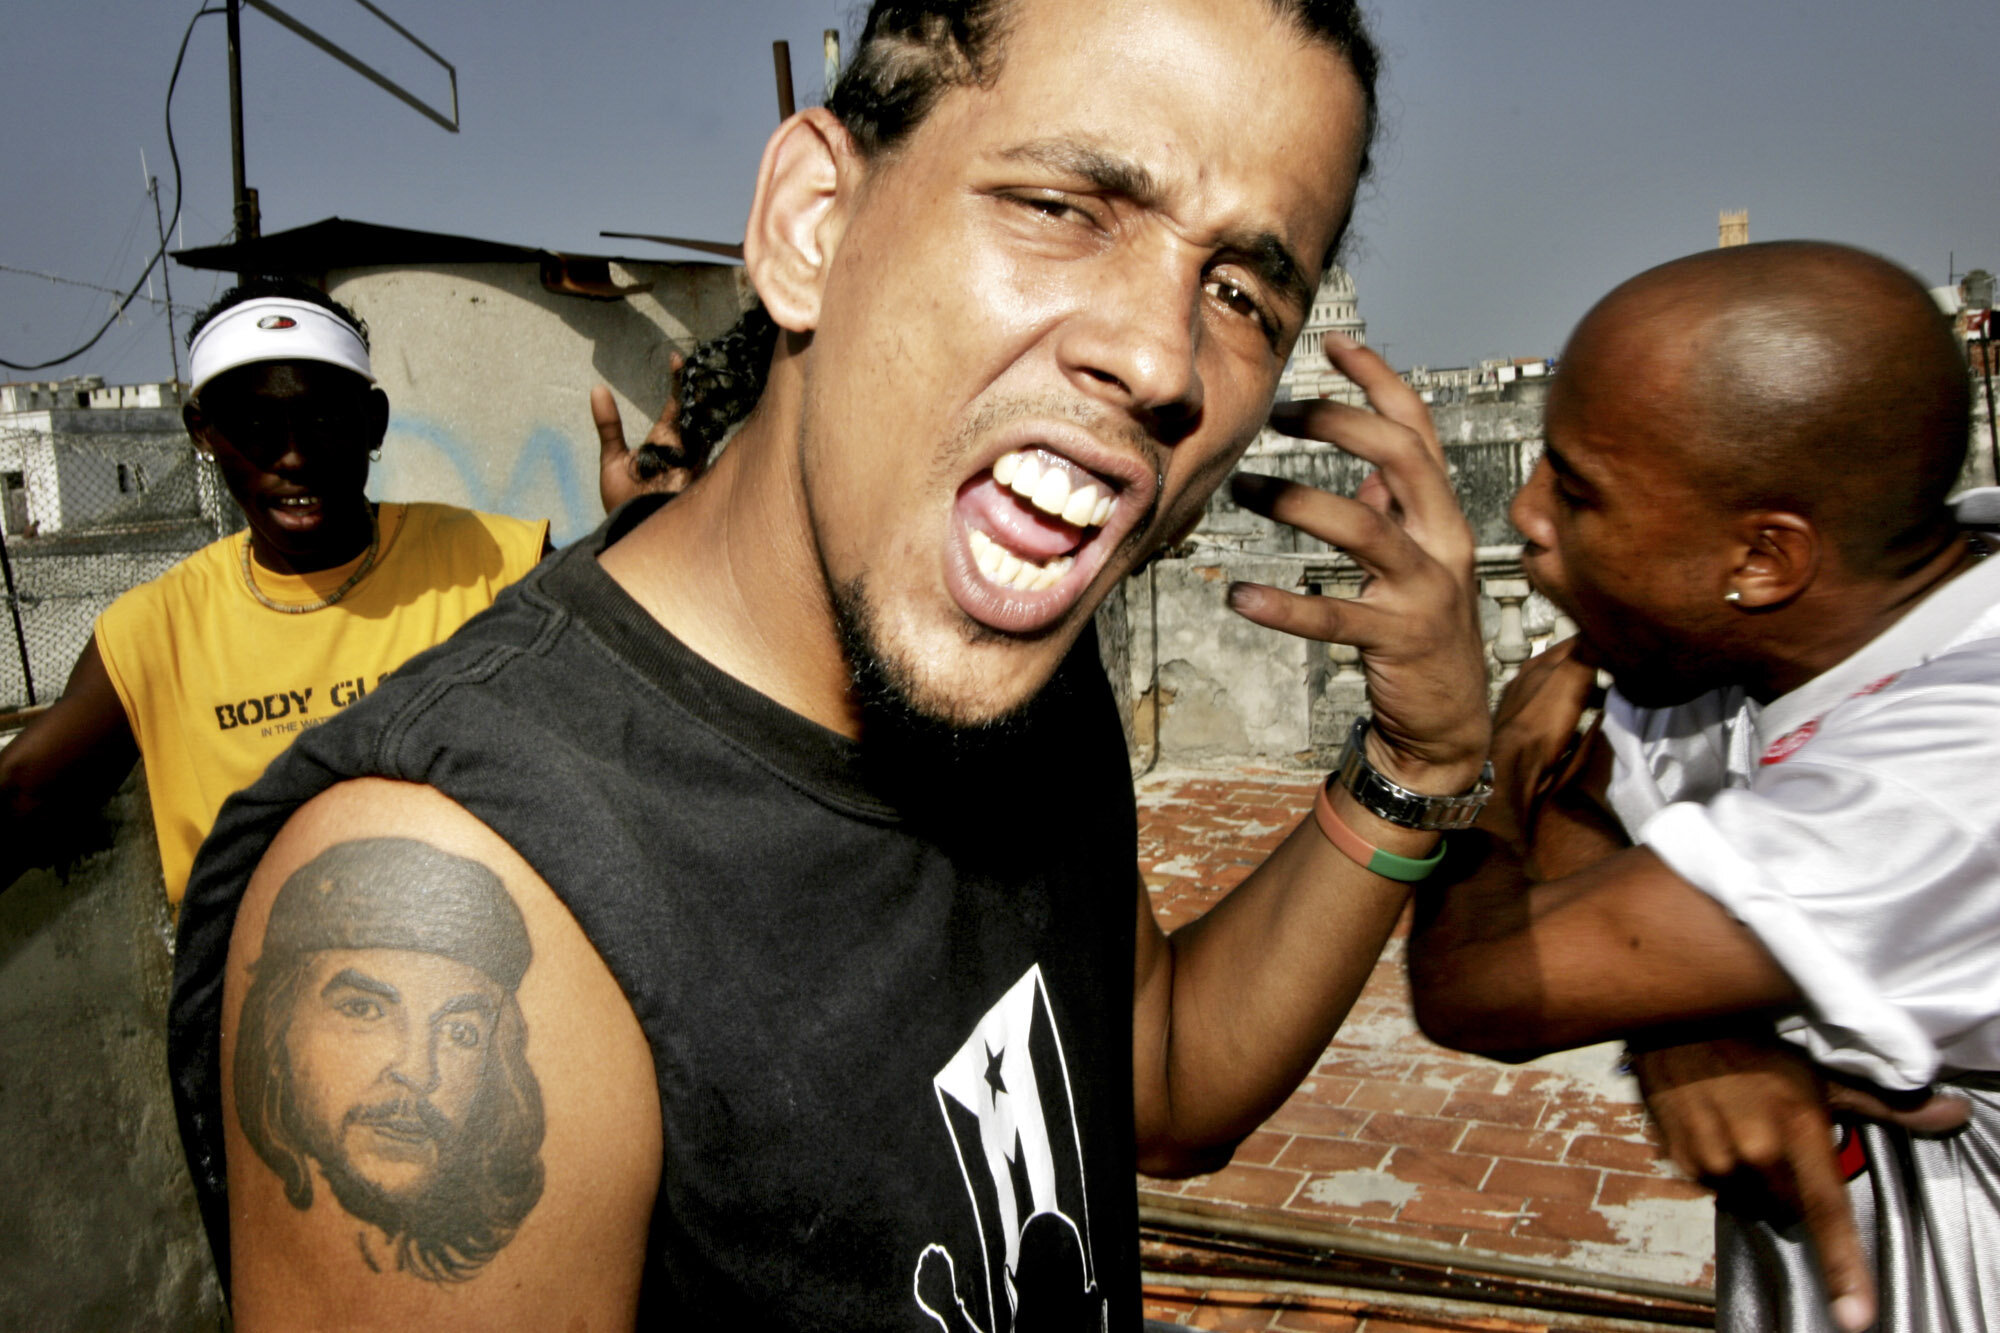  Wagner, Cuban rap musician of the band La Familia, with a Che Guevara Tattoo on his arm, during a rehearsal at a Centro Habana rooftop, 2006. 